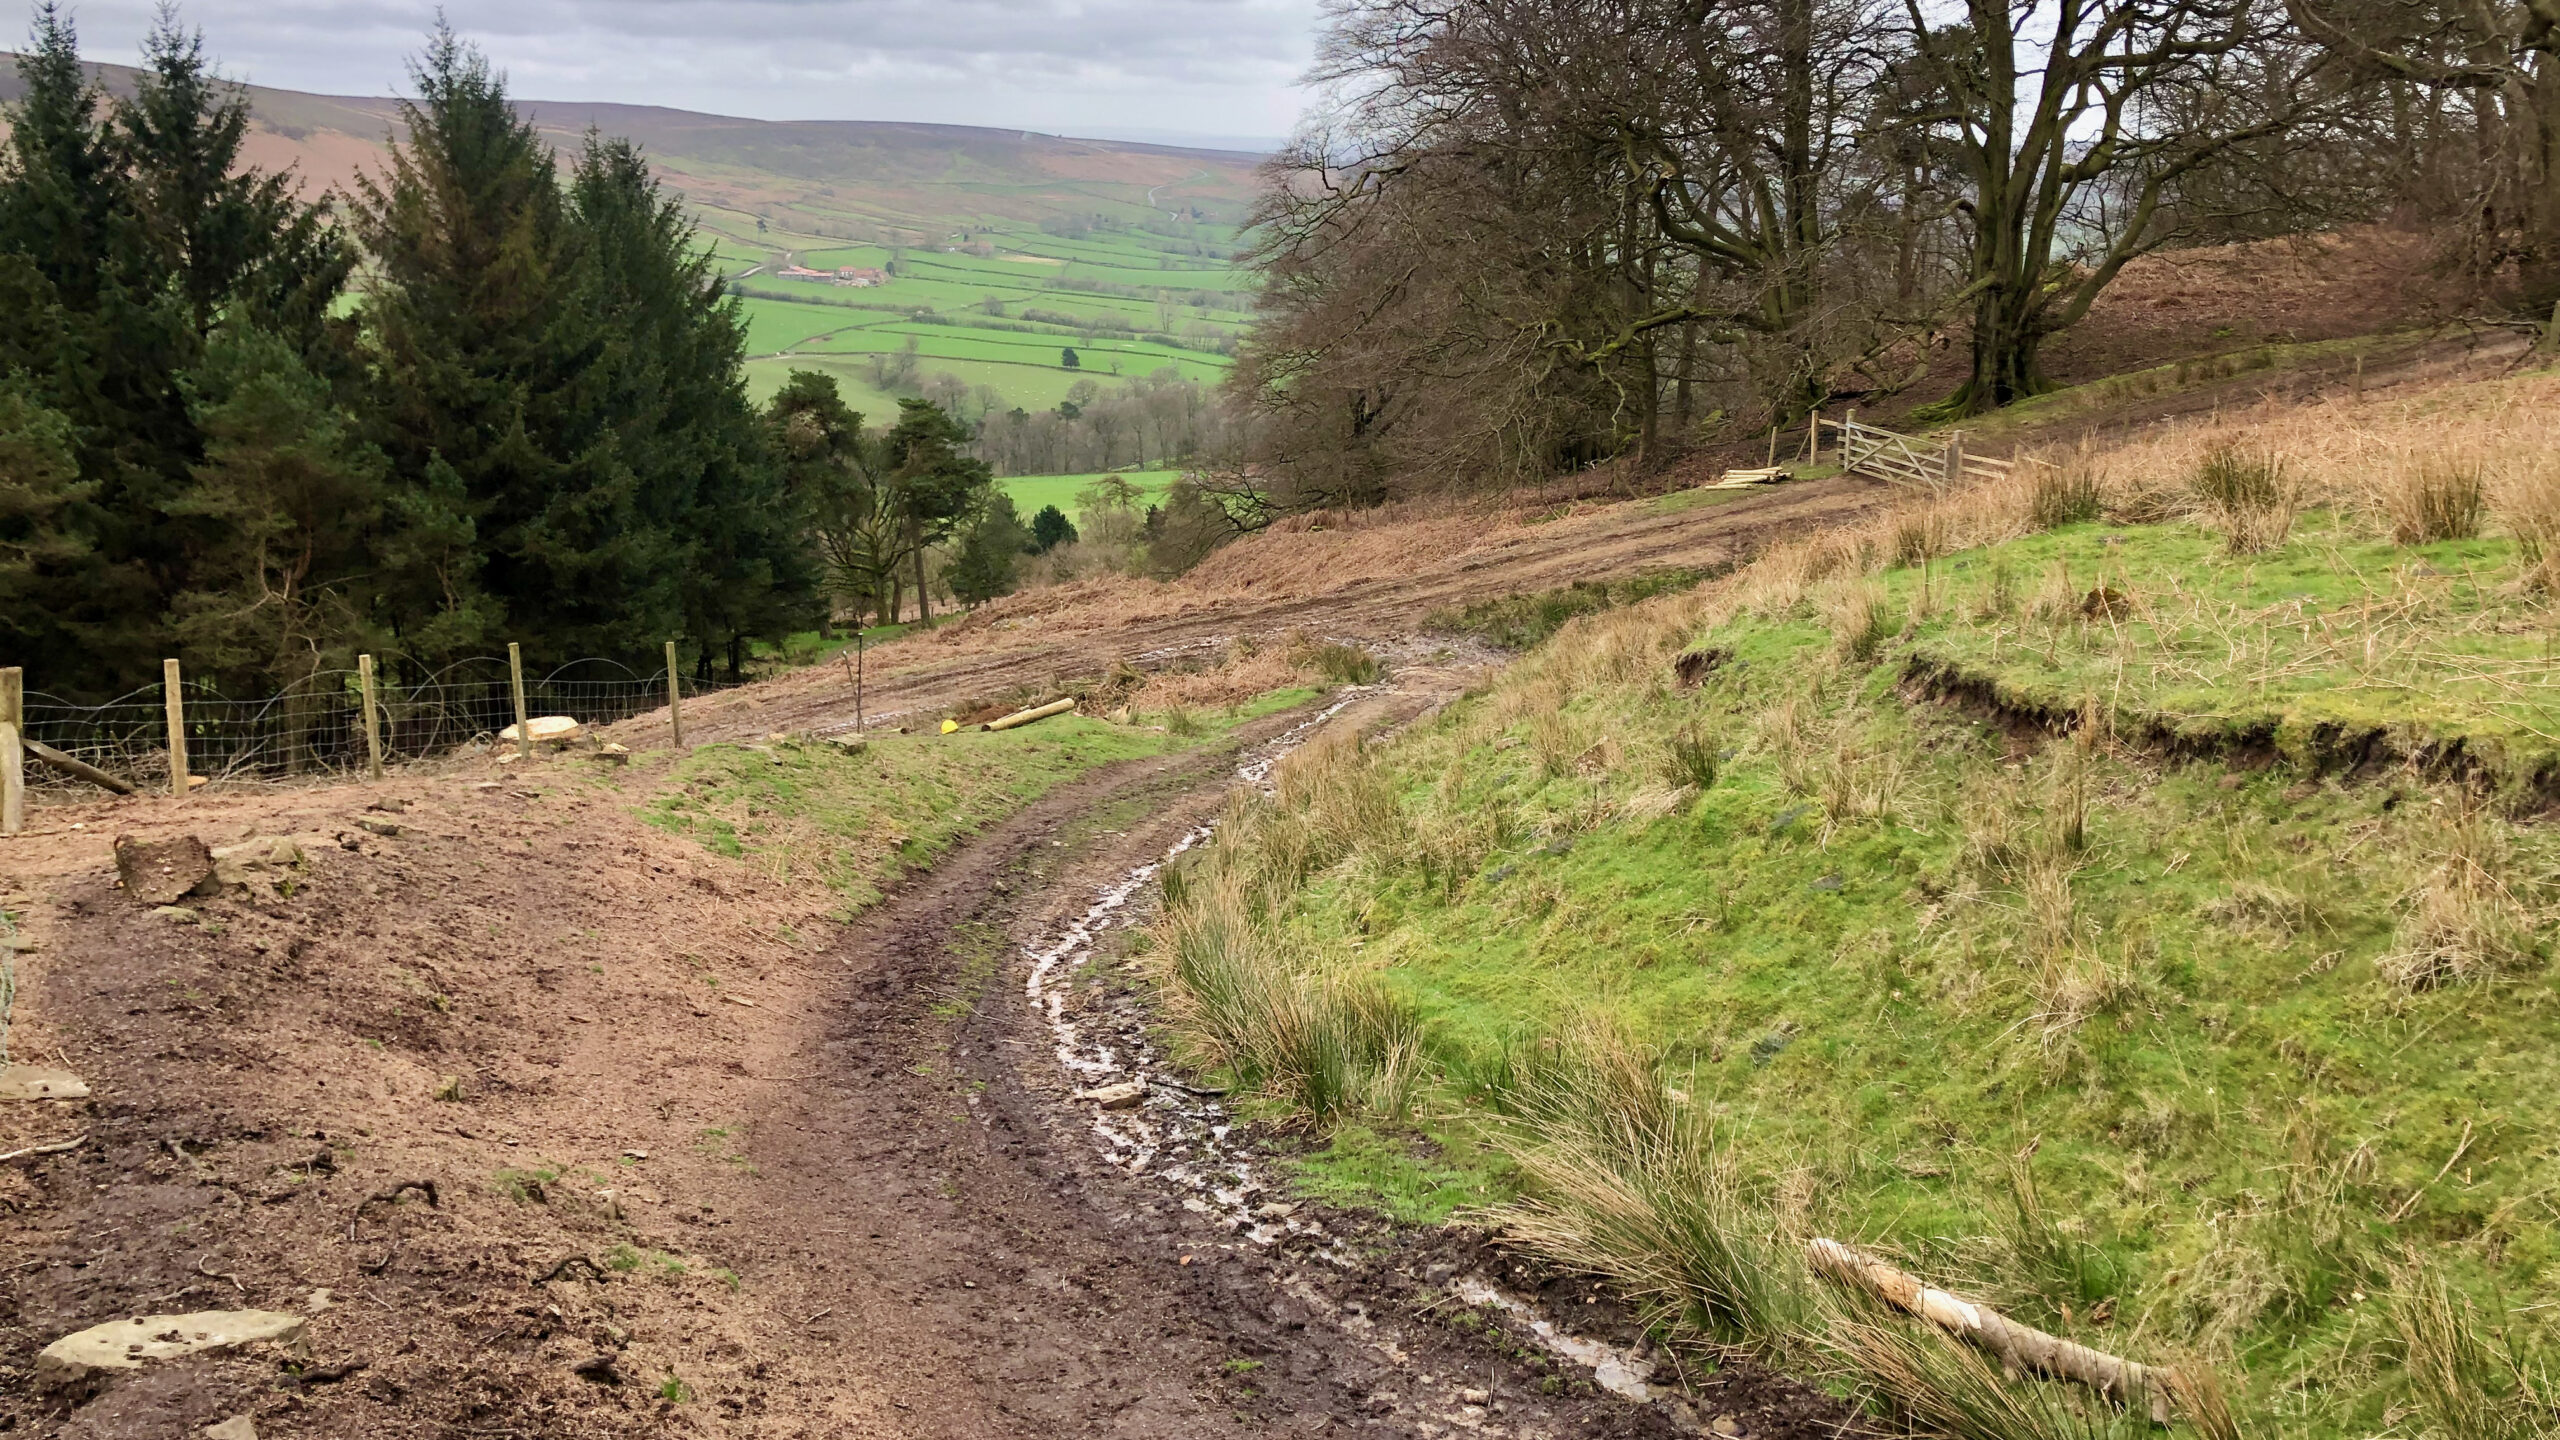 An Ancient Route into Bransdale